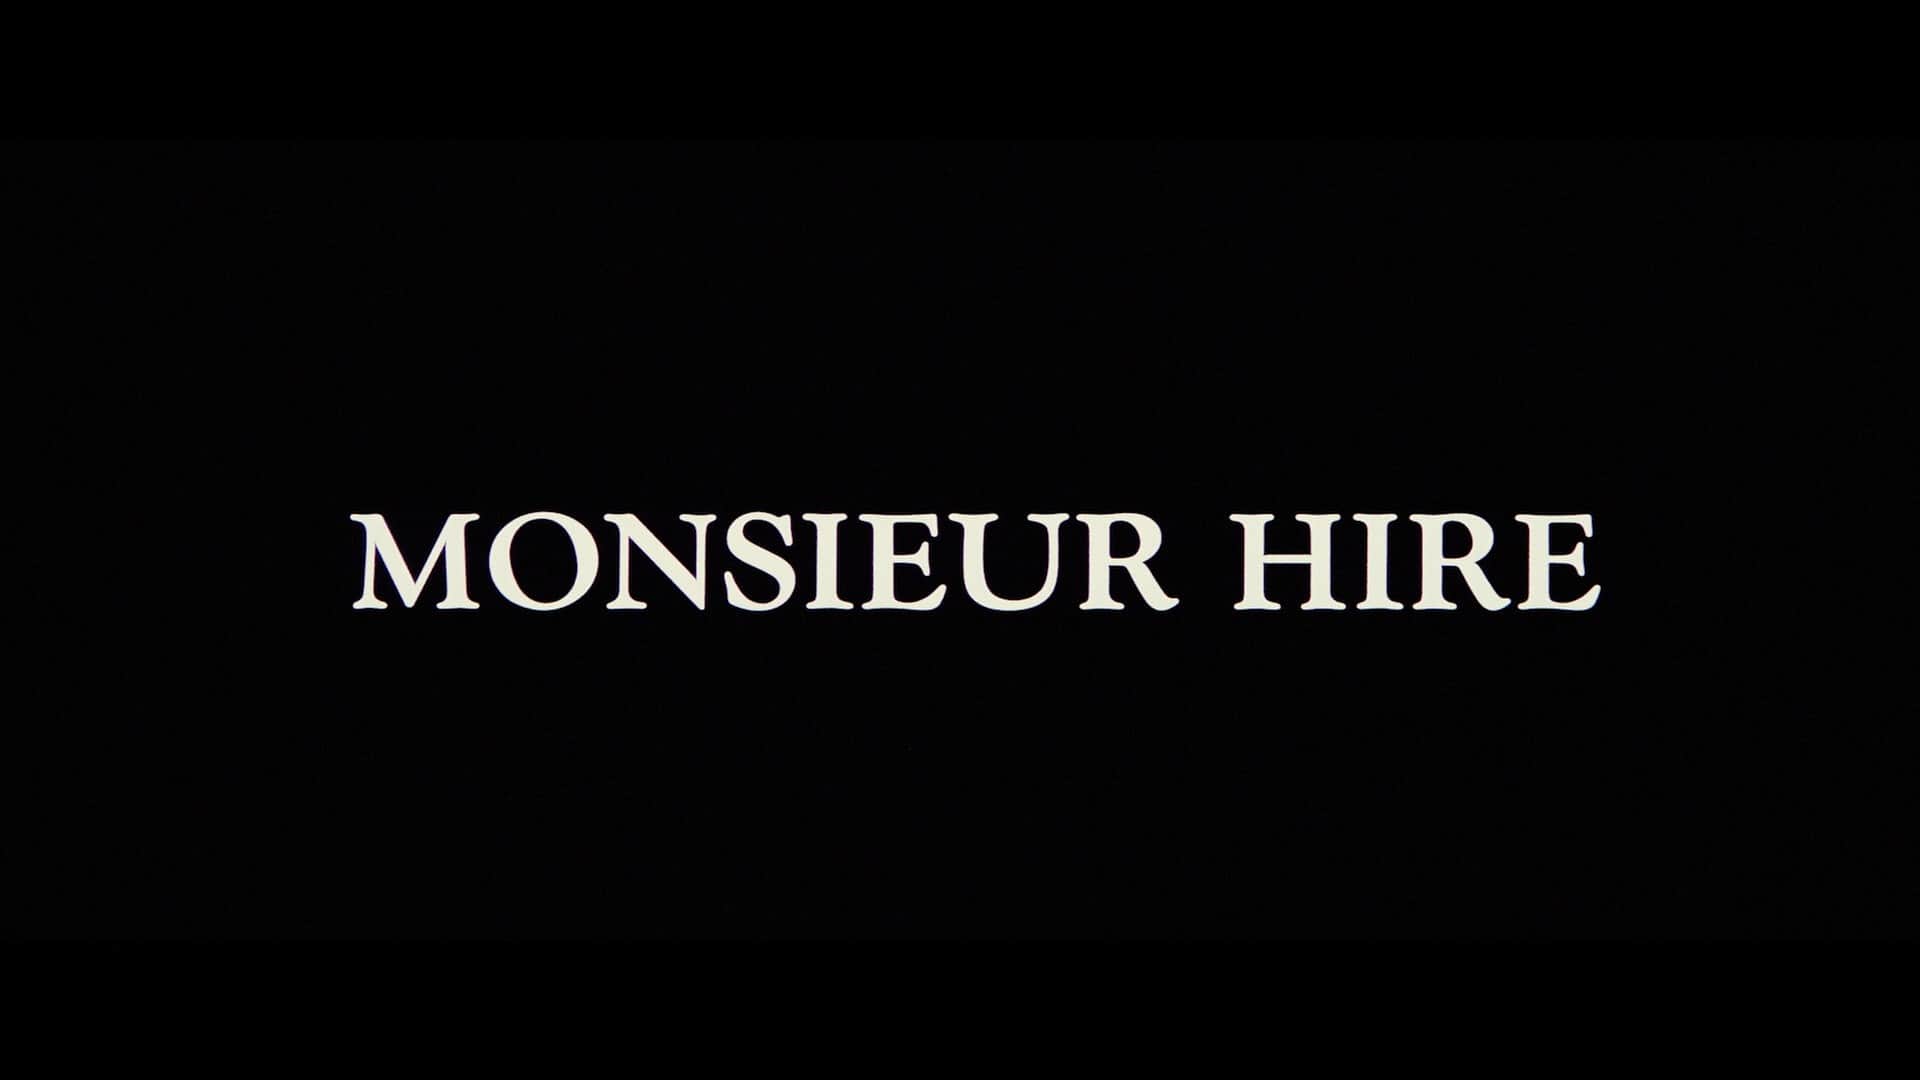 Monsieur Hire (1989) [Cohen Collection Blu-ray review] 25